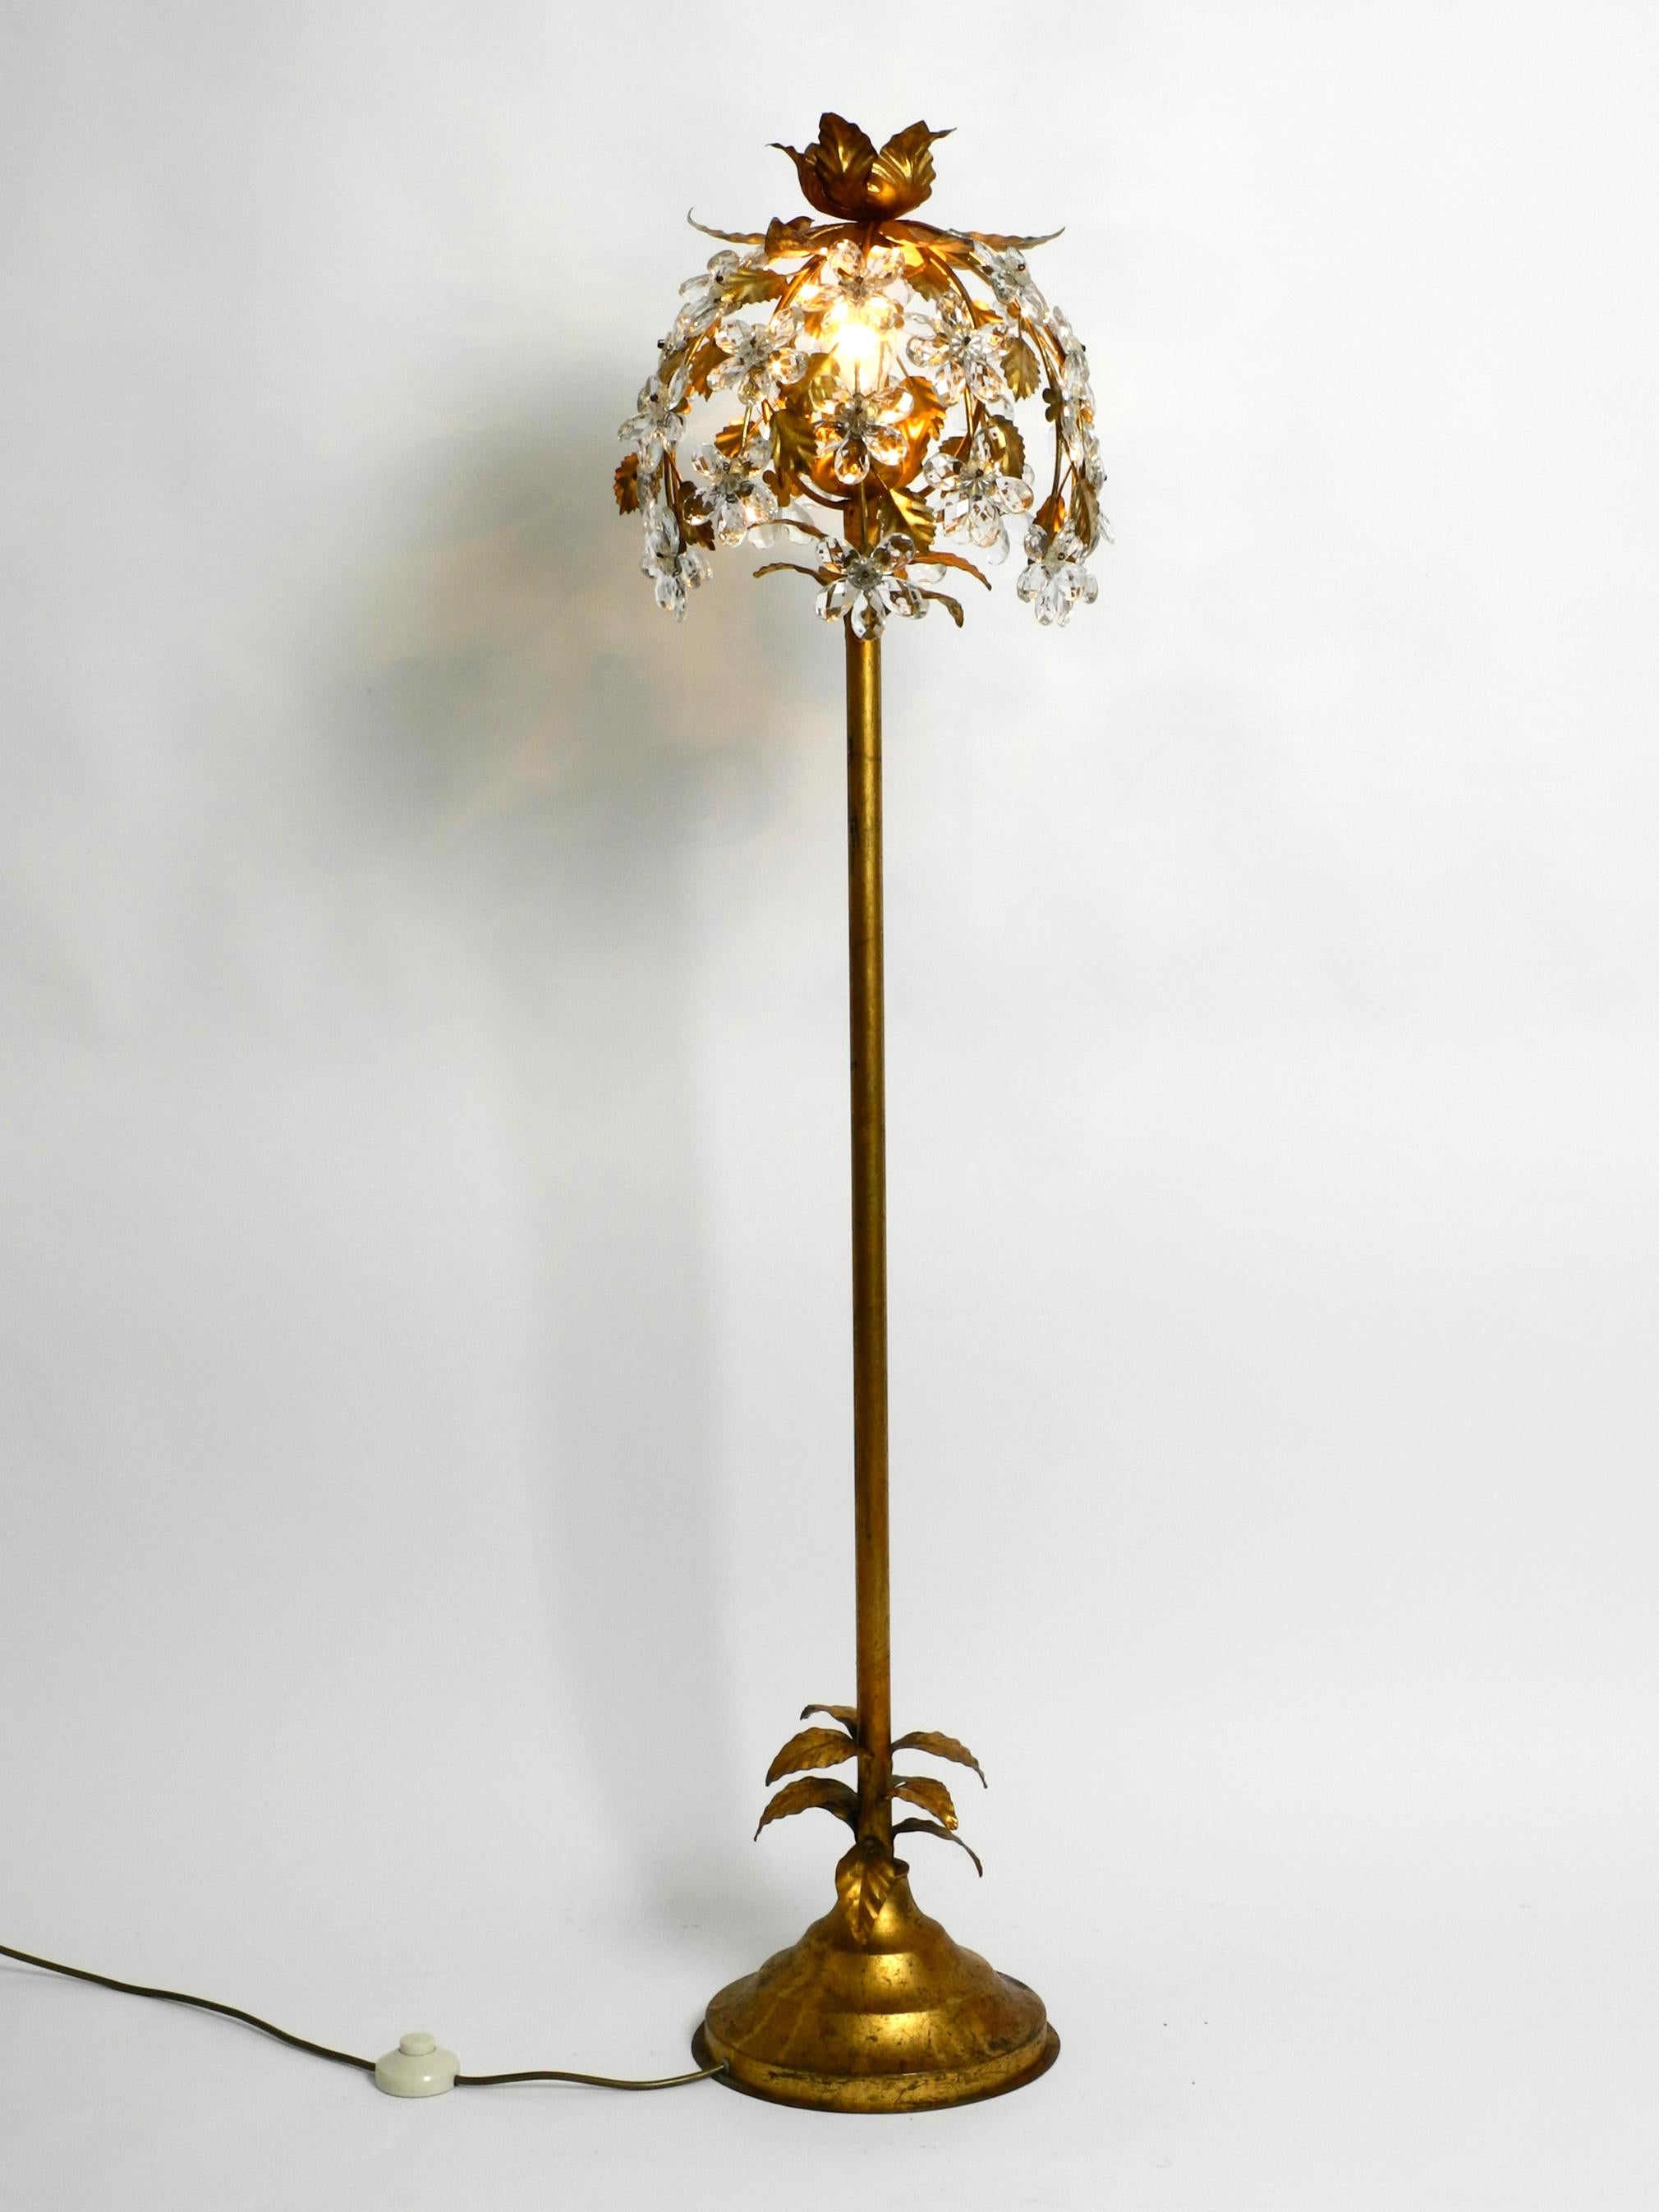 Elegant, rare 1960s Florentine floor lamp gold-plated with crystal stones. 
Made in Italy. By Banci Firenze.
Very elegant lampshade design with transparent flowers and leaves made of crystal glass.
The entire frame is made of metal and is